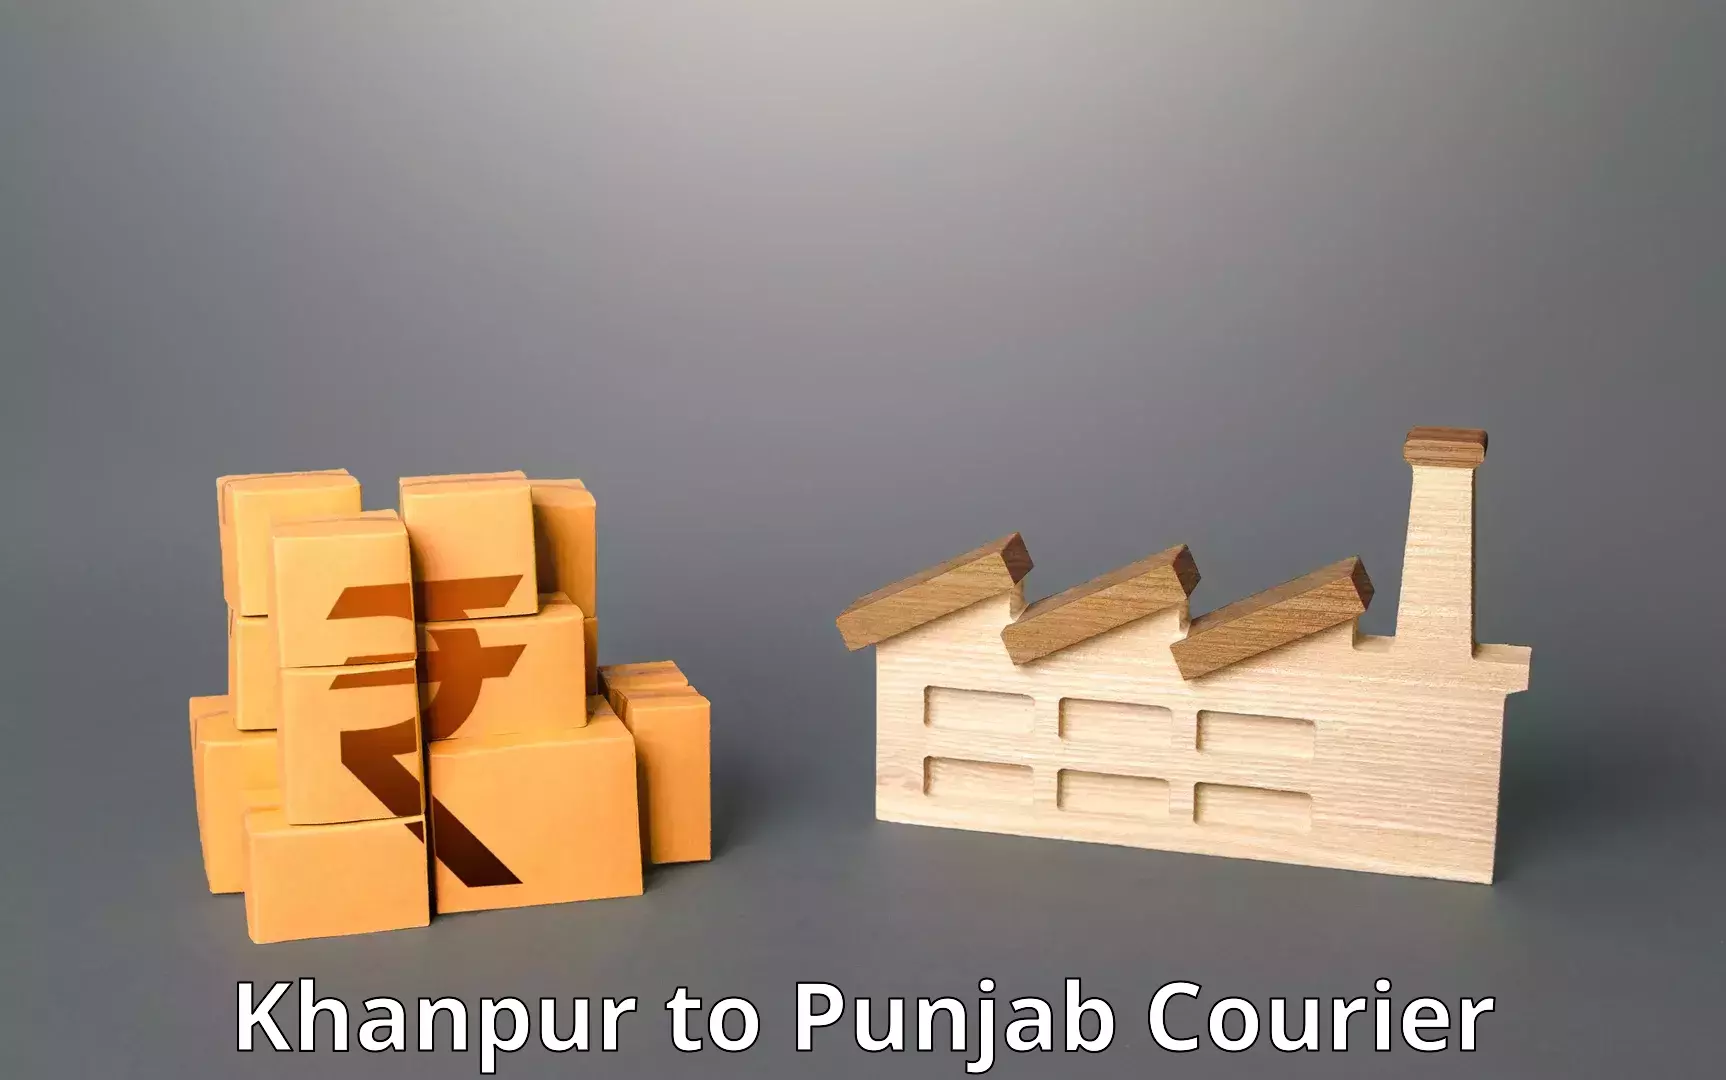 Parcel handling and care Khanpur to Punjab